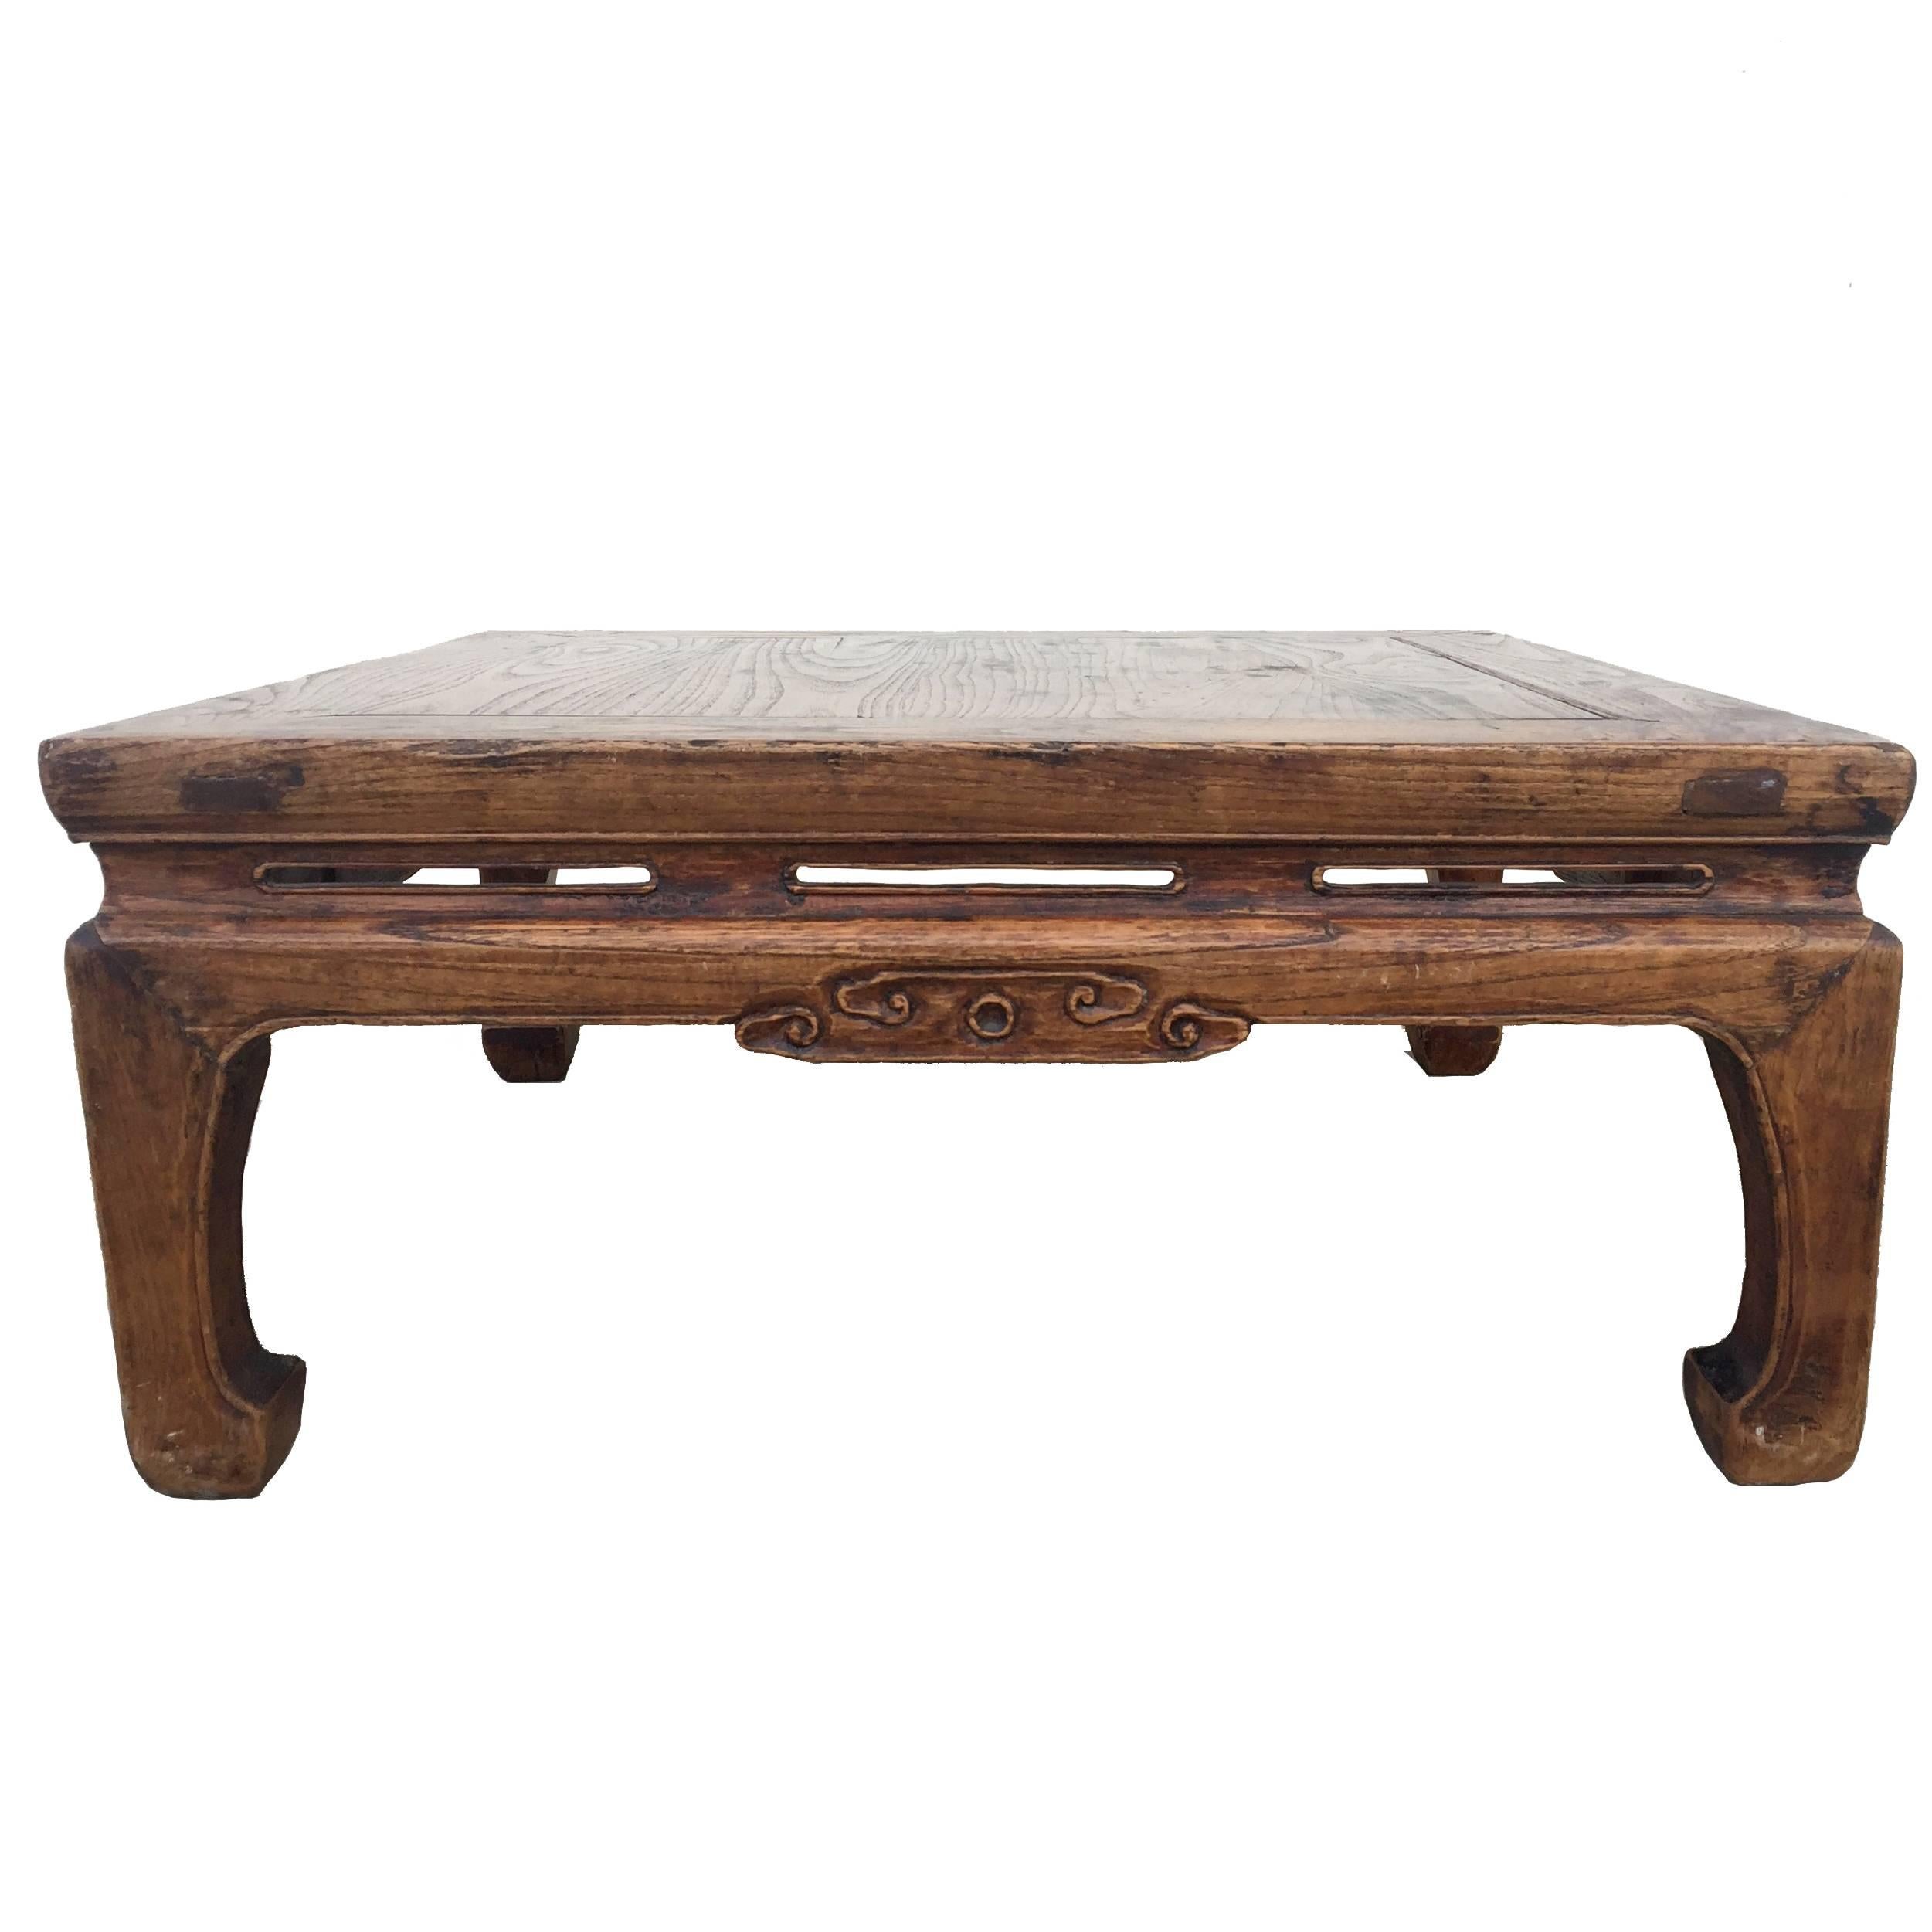 Antique Chinese Square Kang Table, Low Table For Sale